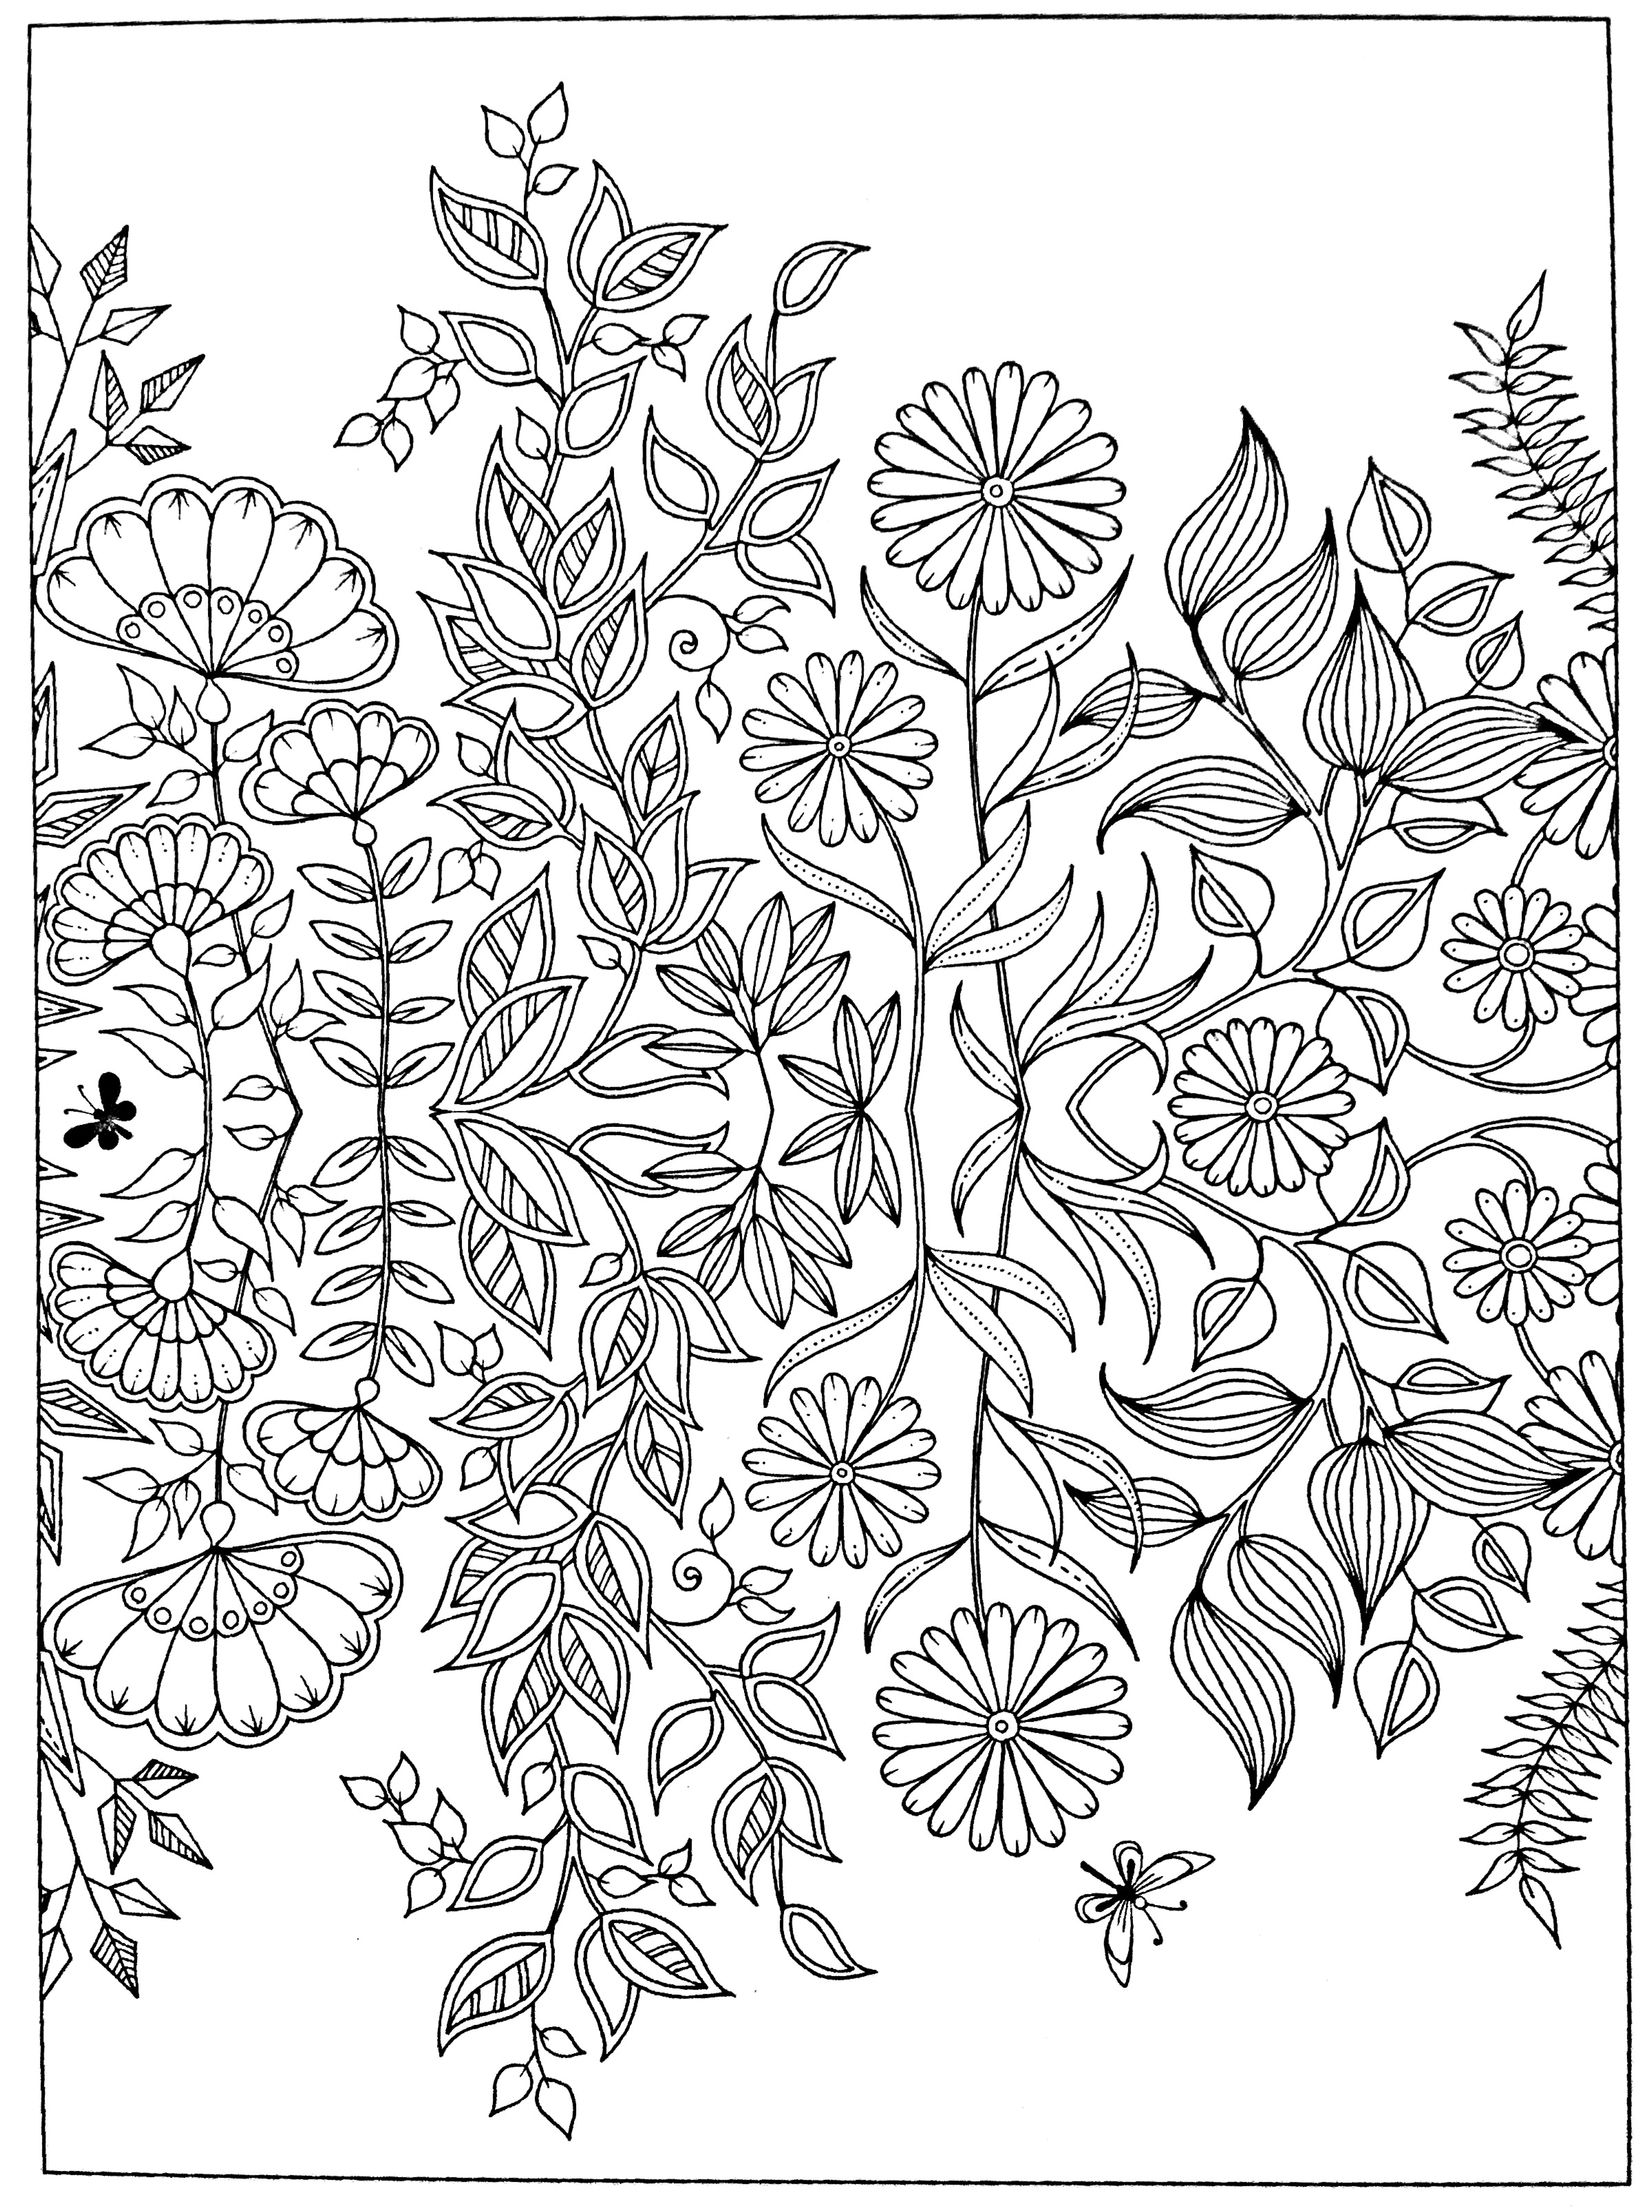 Free adult coloring page Secret Garden | Mermaid coloring pages ...